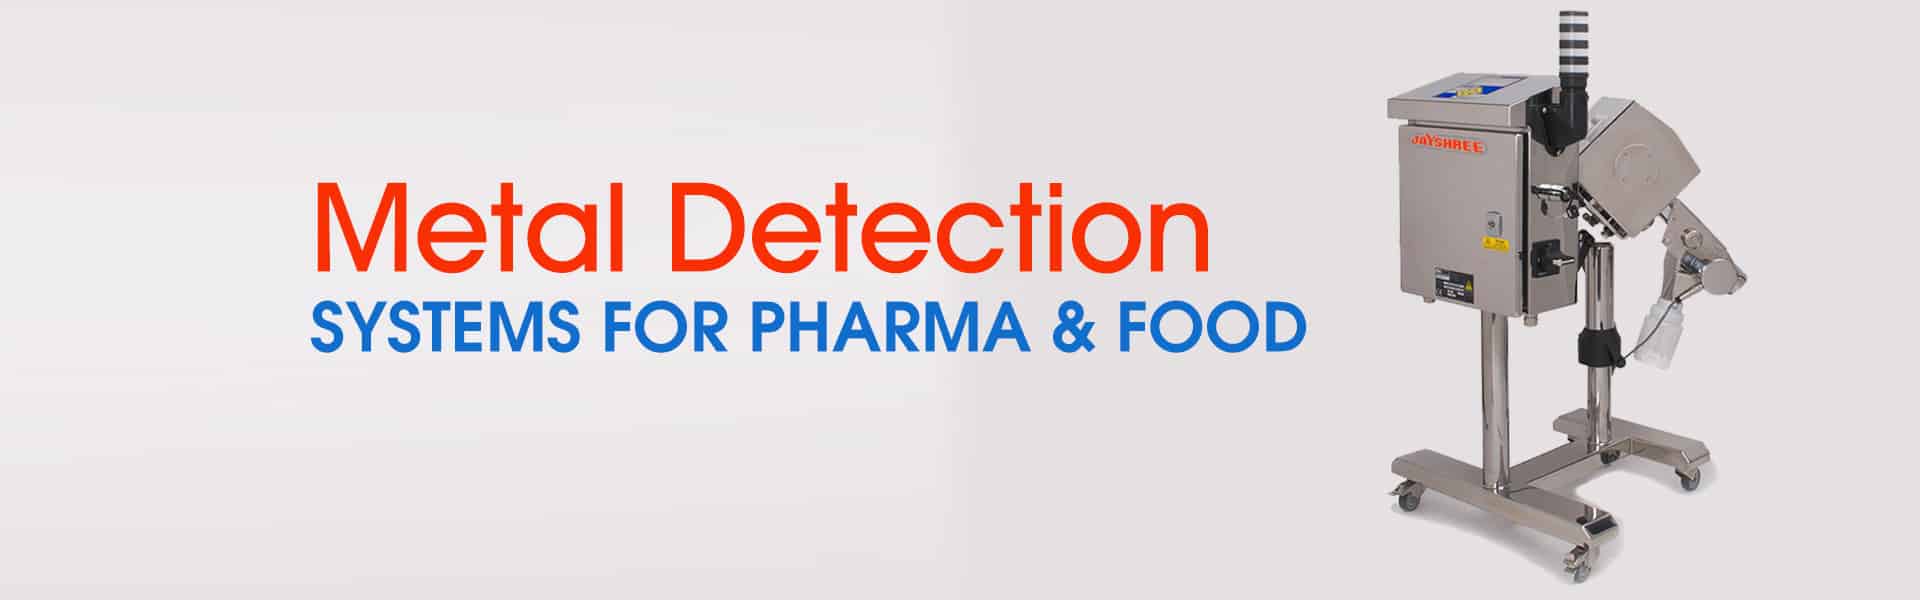 home-banner of Metal Detection Systems for Pharma & Food